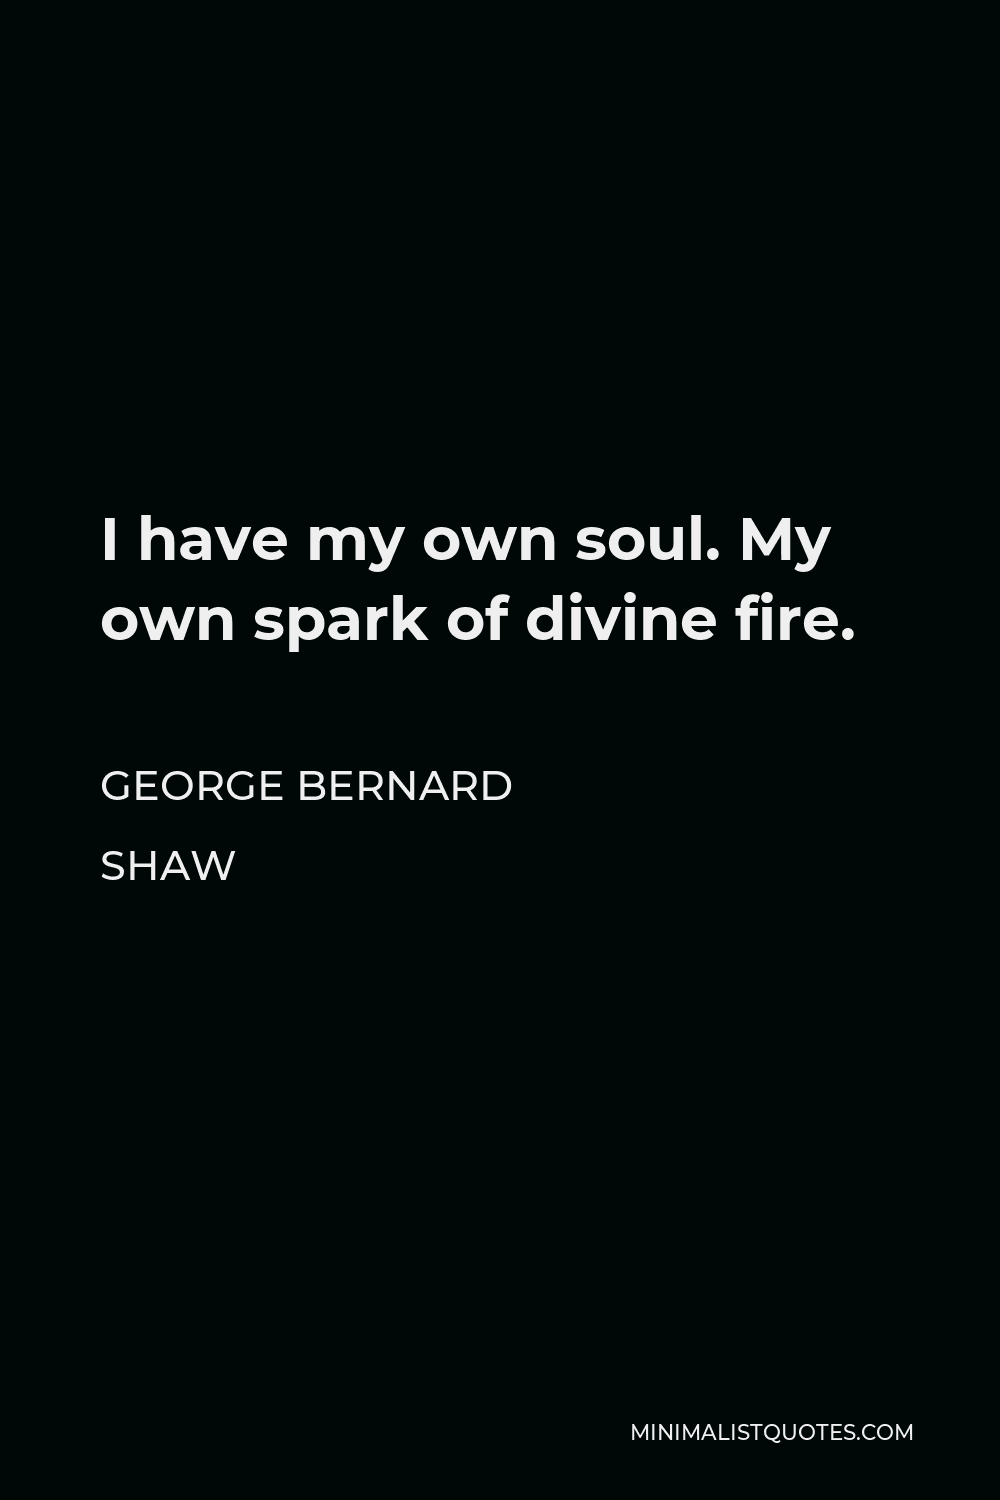 George Bernard Shaw Quote - I have my own soul. My own spark of divine fire.